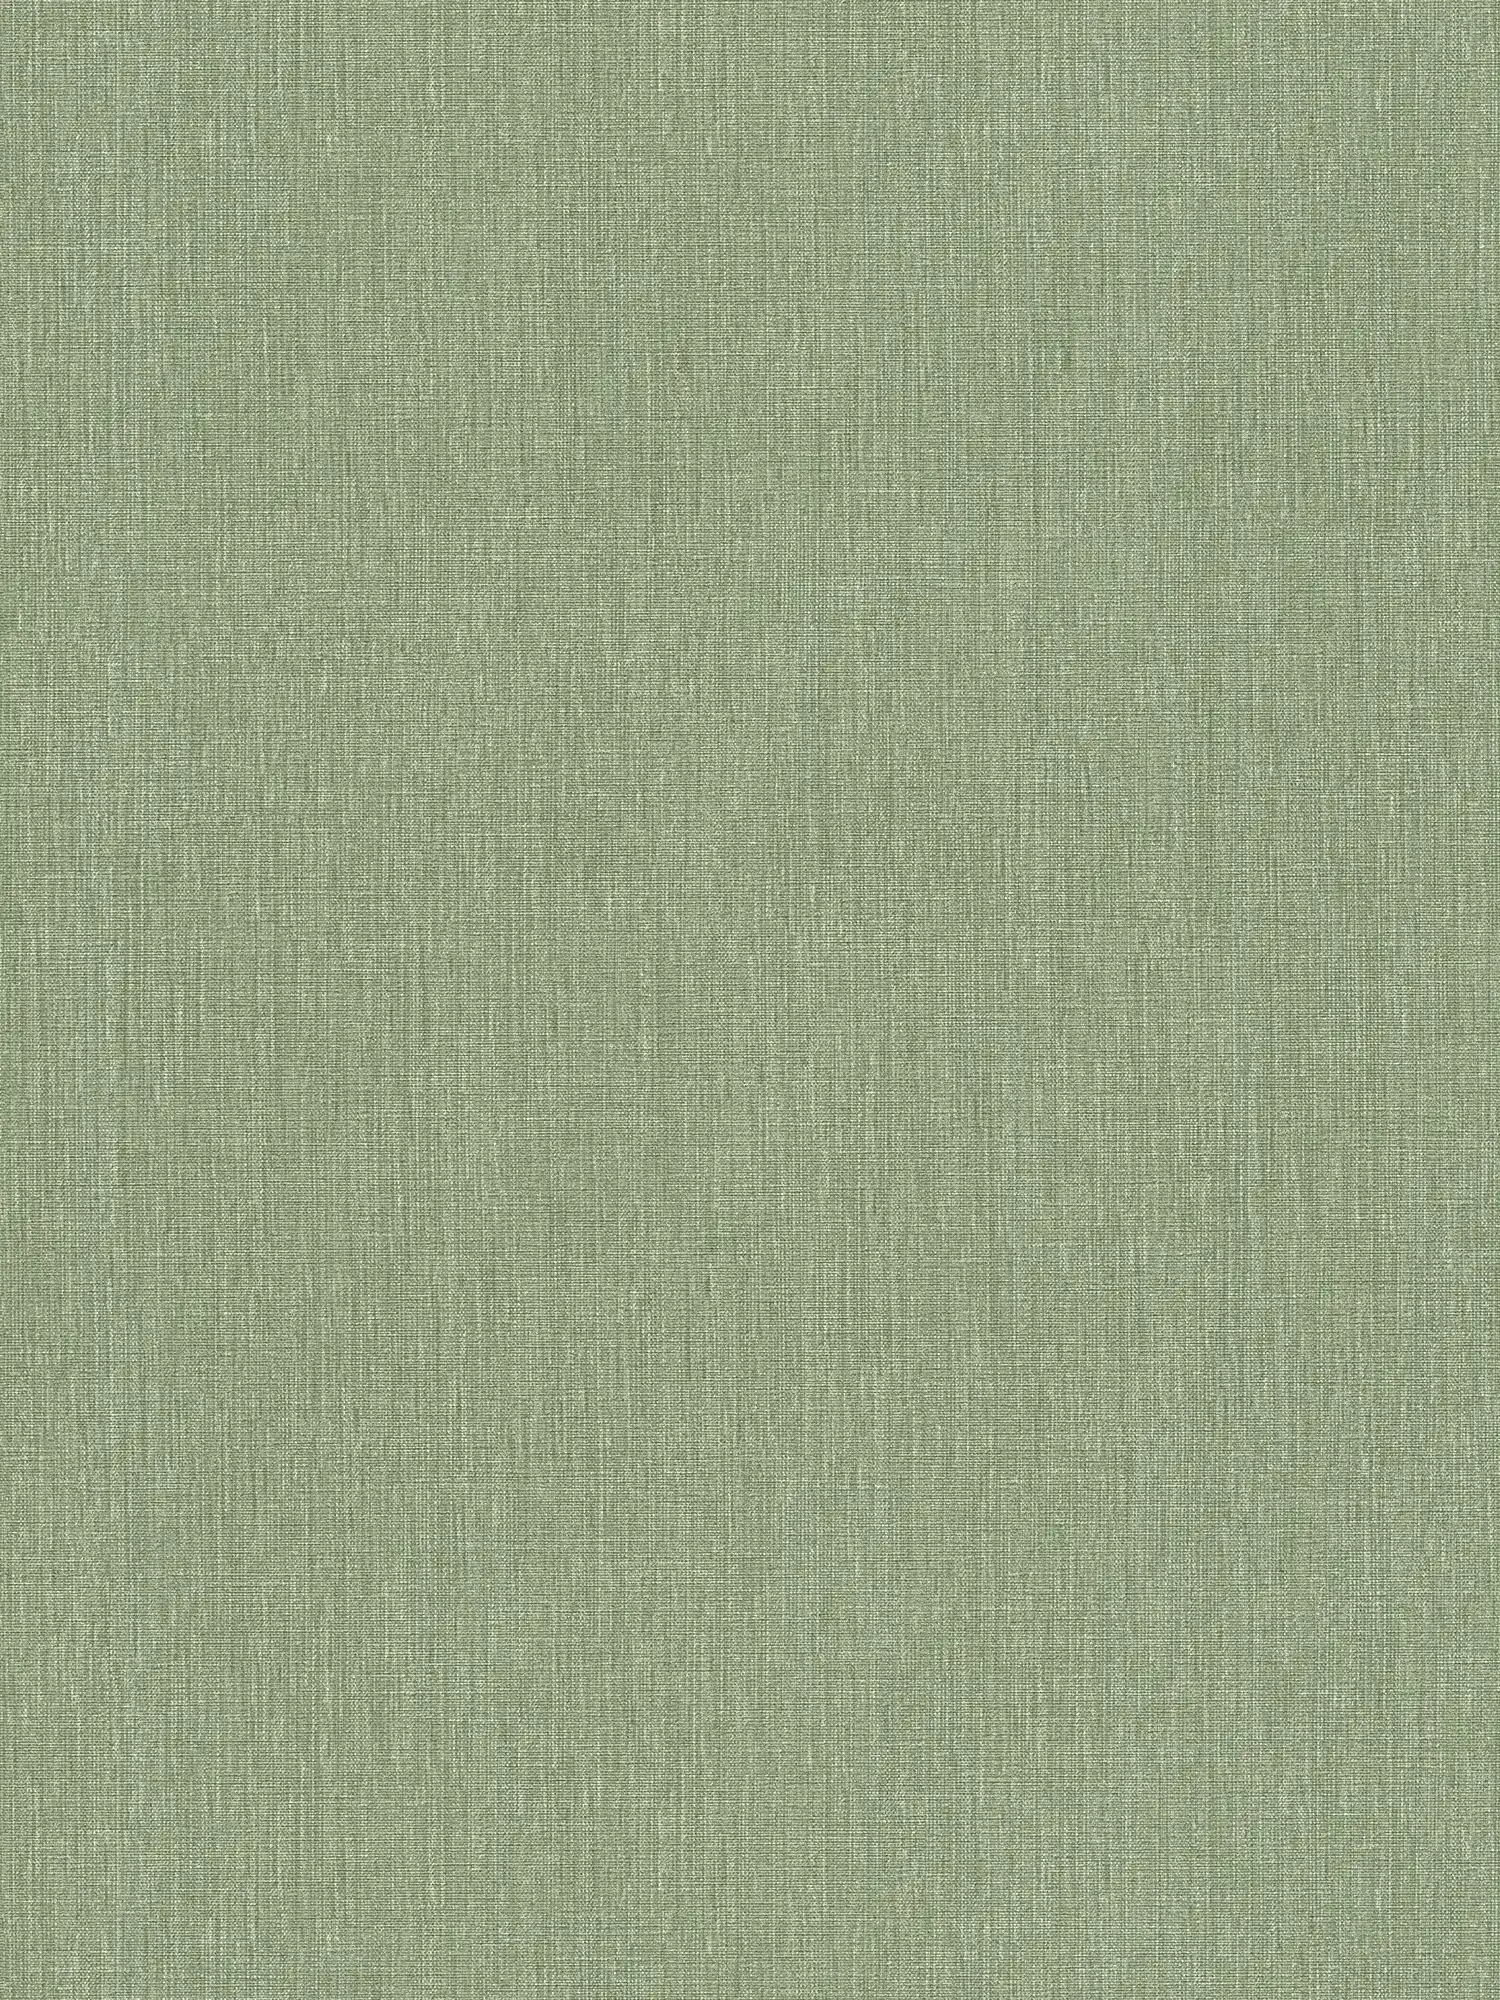 Lightly textured non-woven wallpaper in textile look - green
